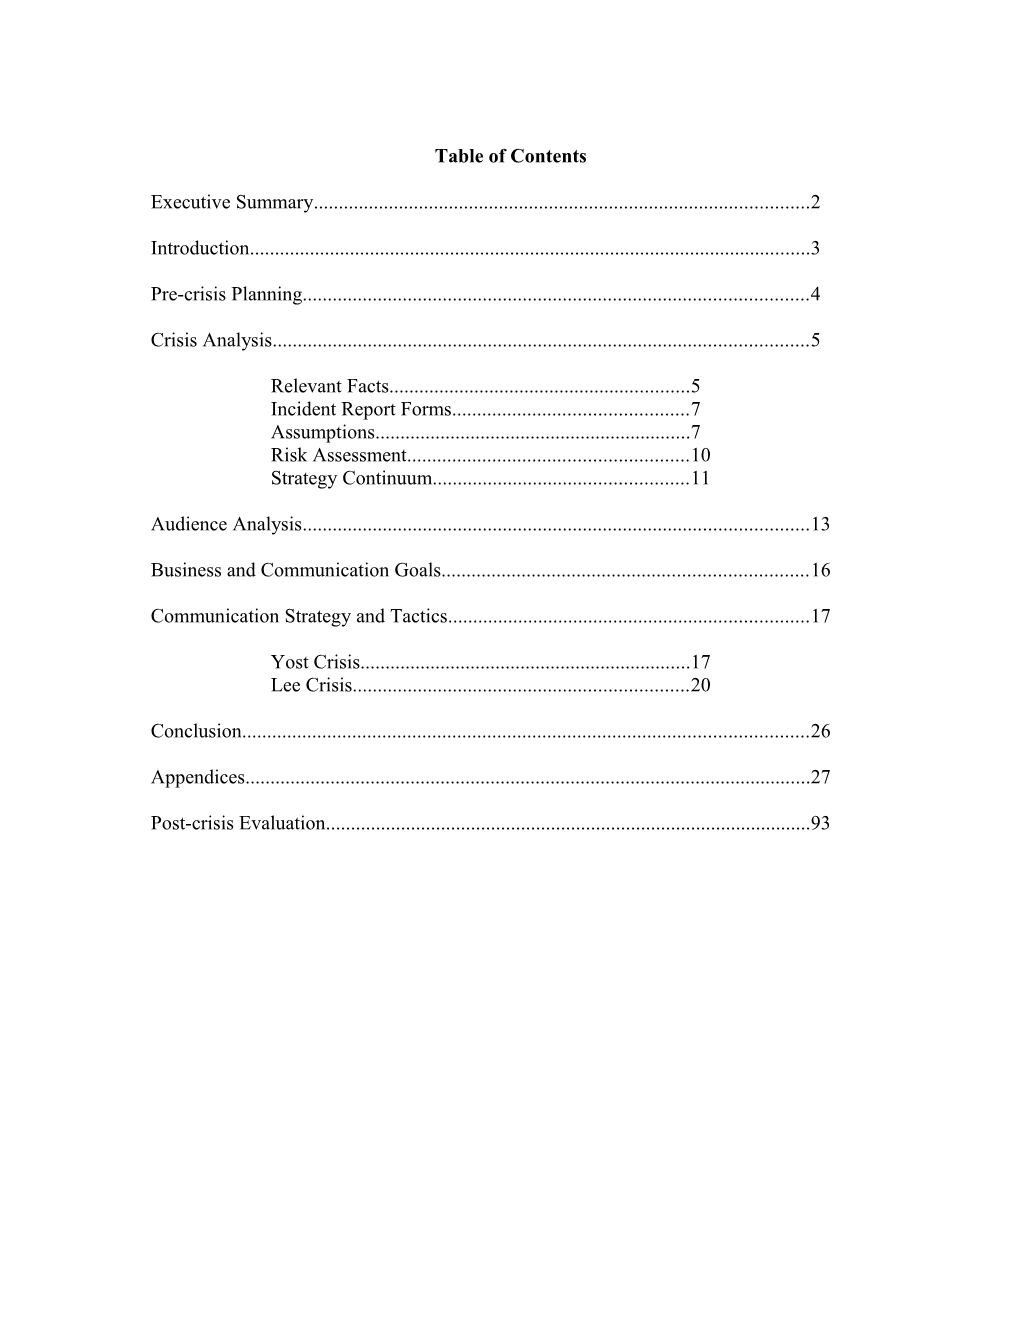 Table of Contents s32